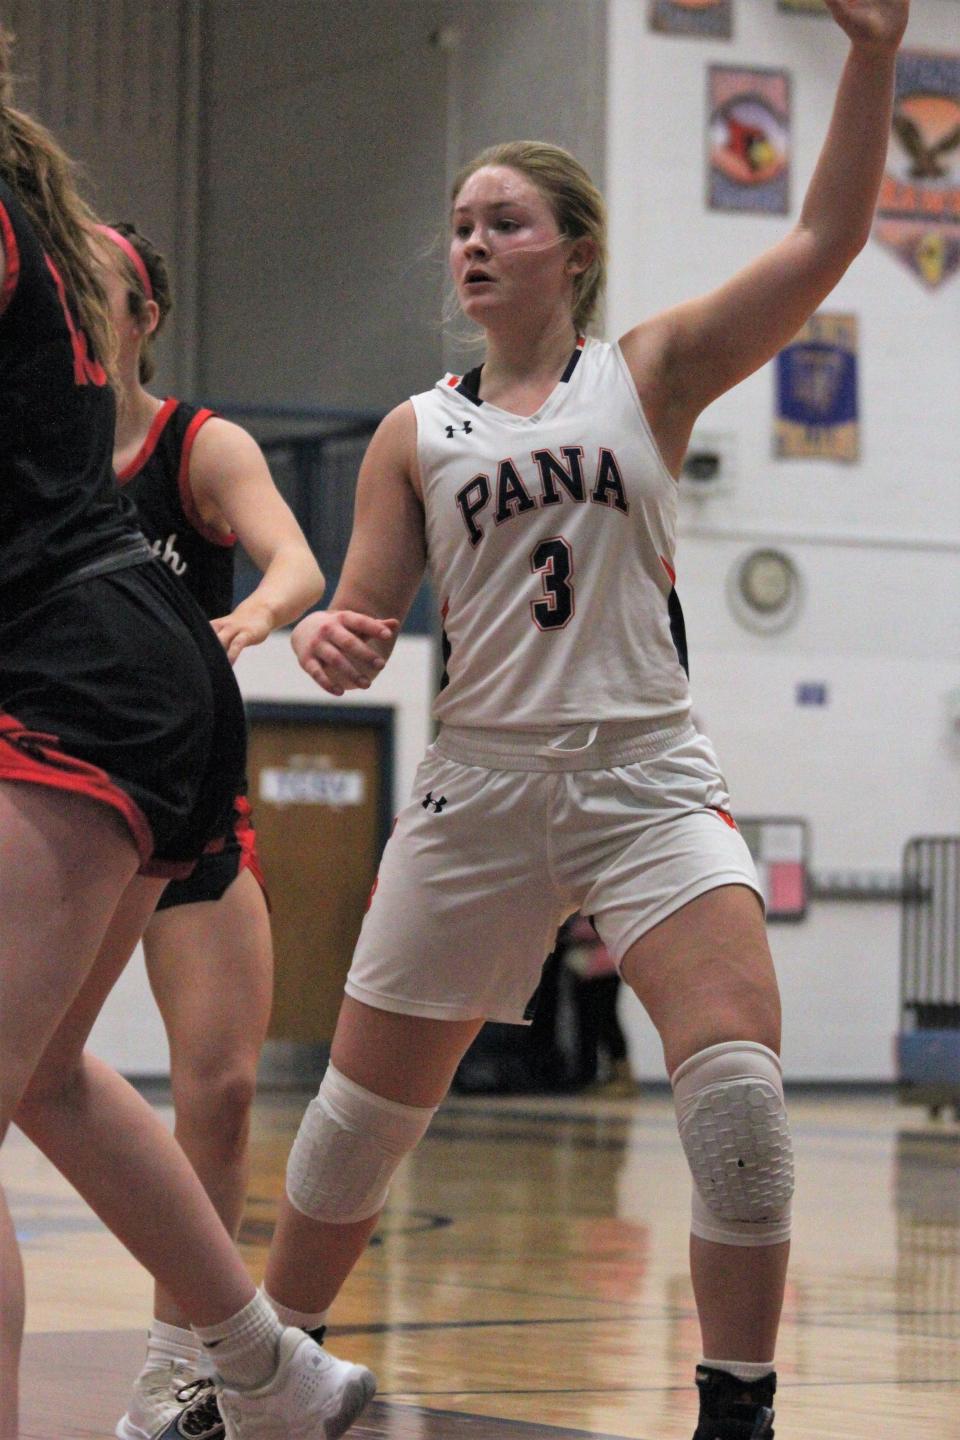 Pana senior Anna Beyers works to get open against Heyworth during the Riverton Christmas Classic at the Hawk Center on Tuesday.